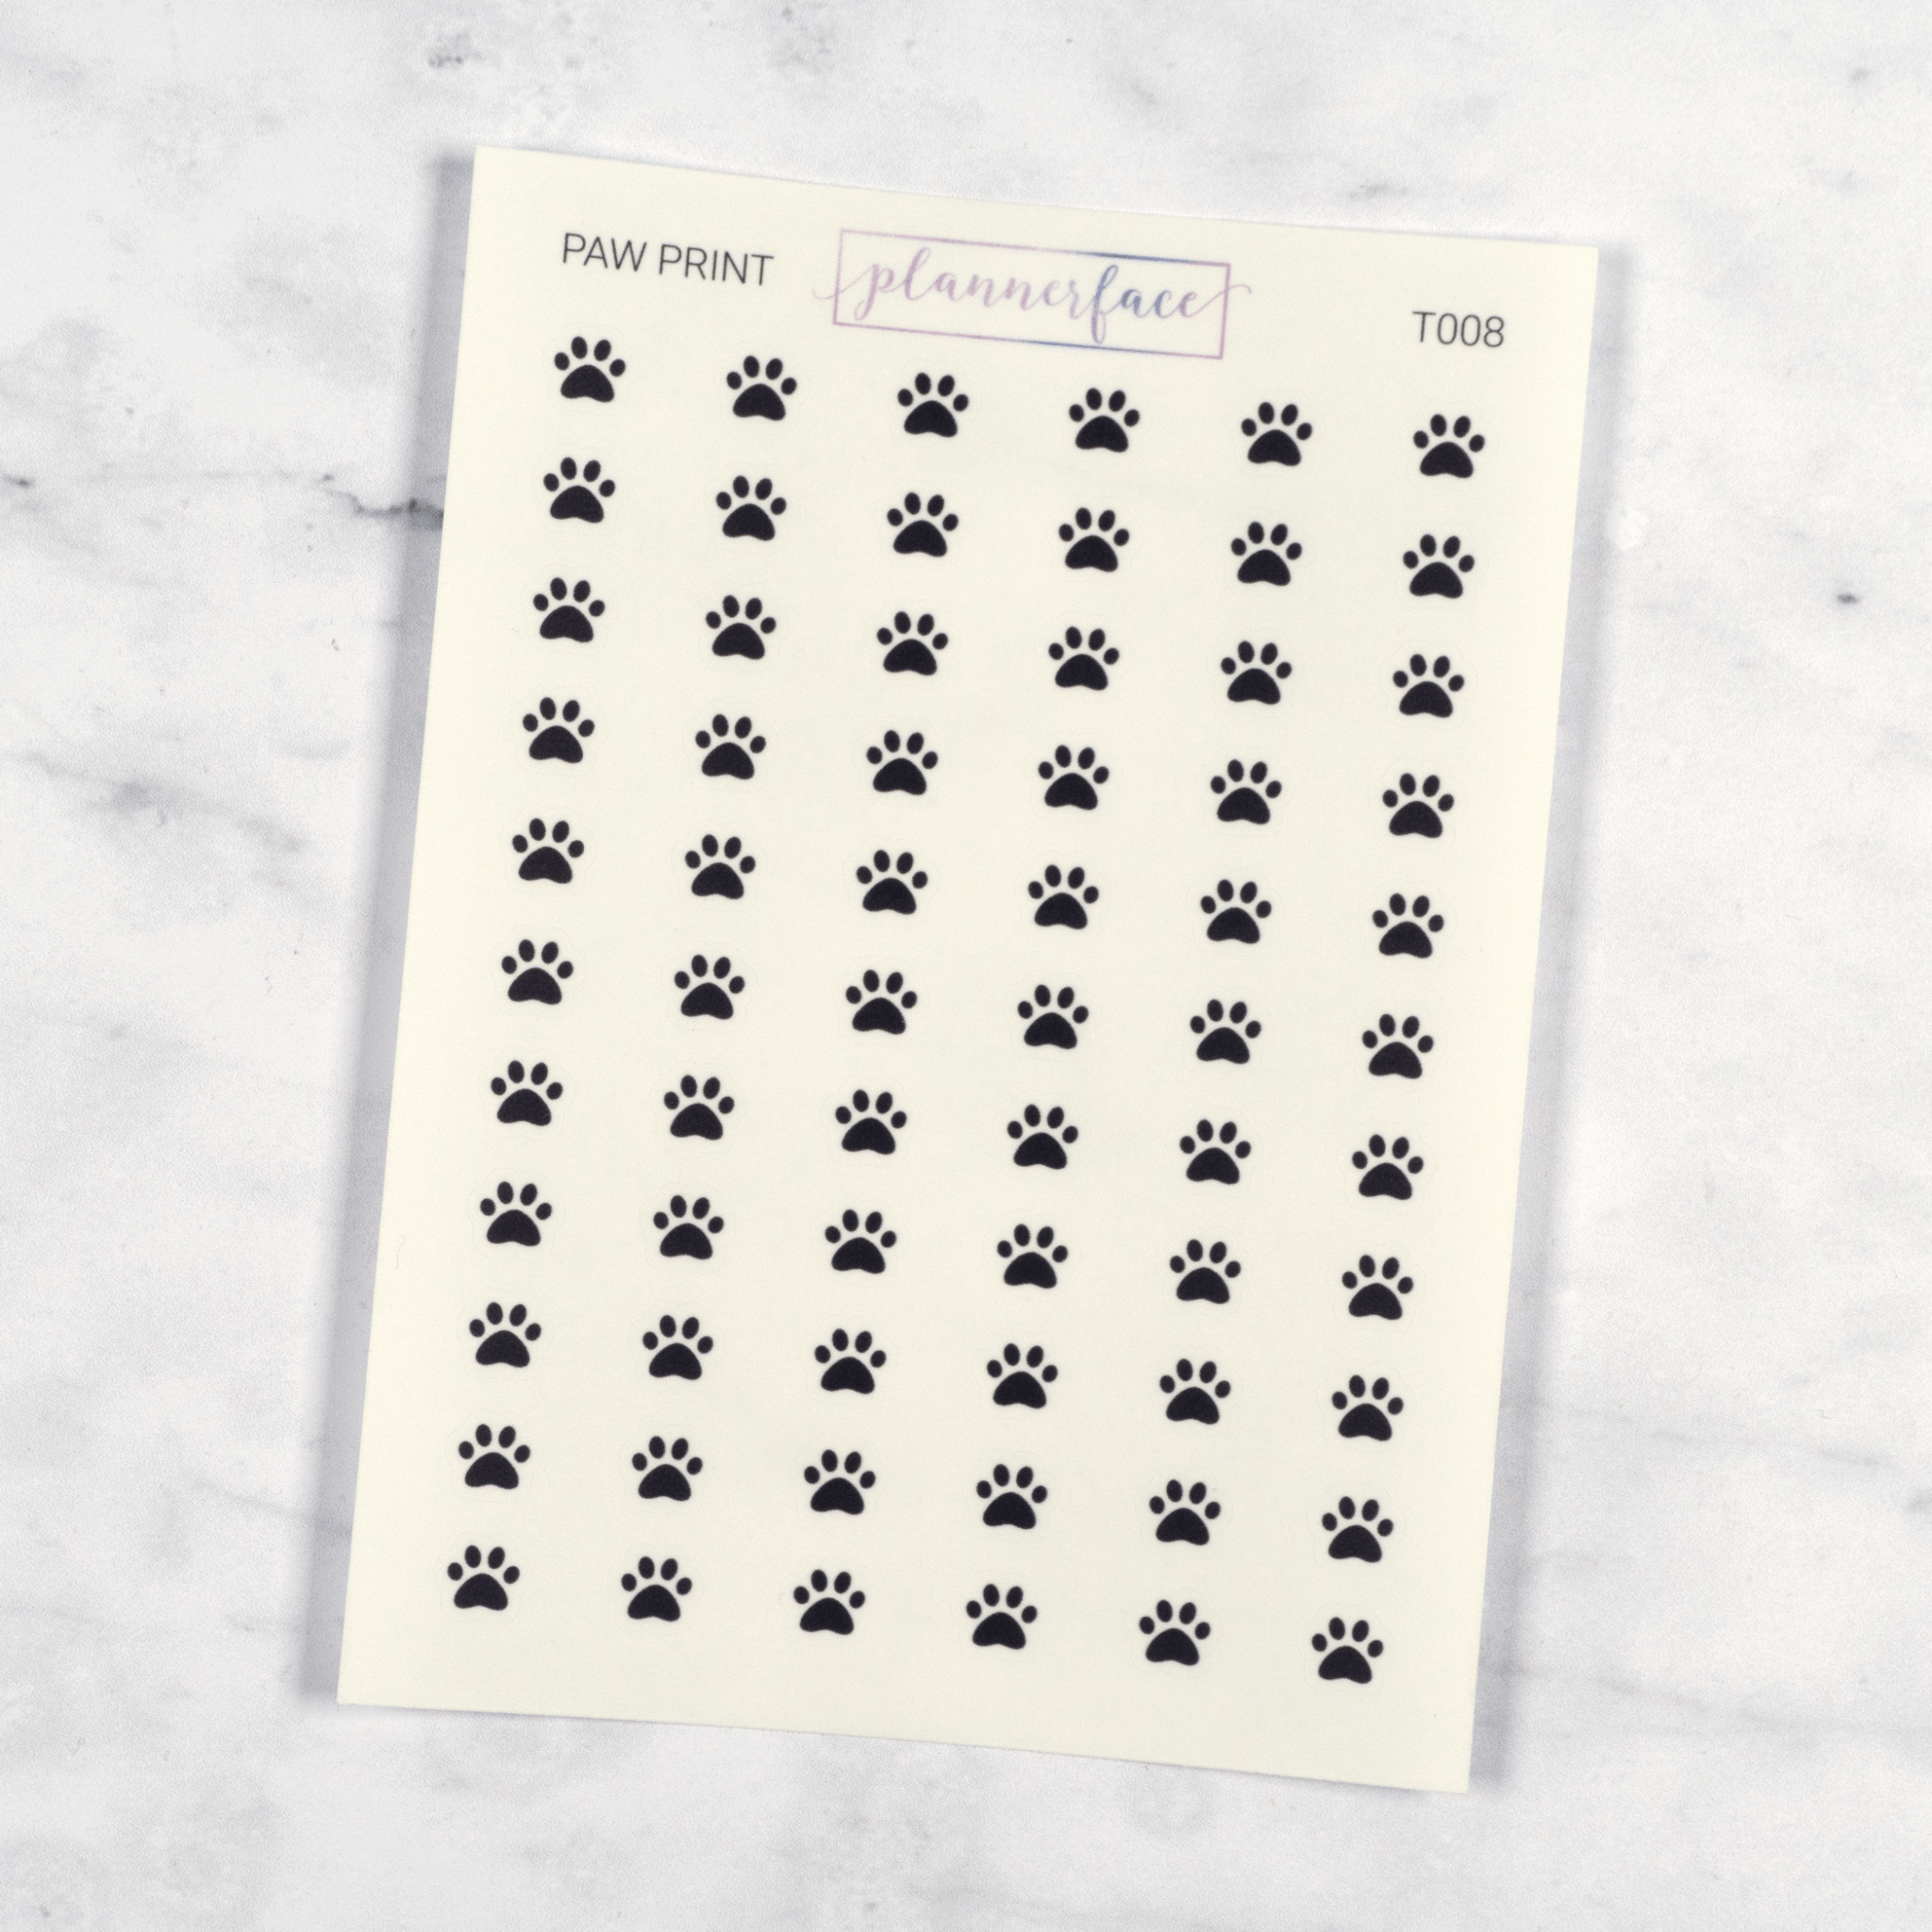 Paw Print Transparent Icon Stickers by Plannerface